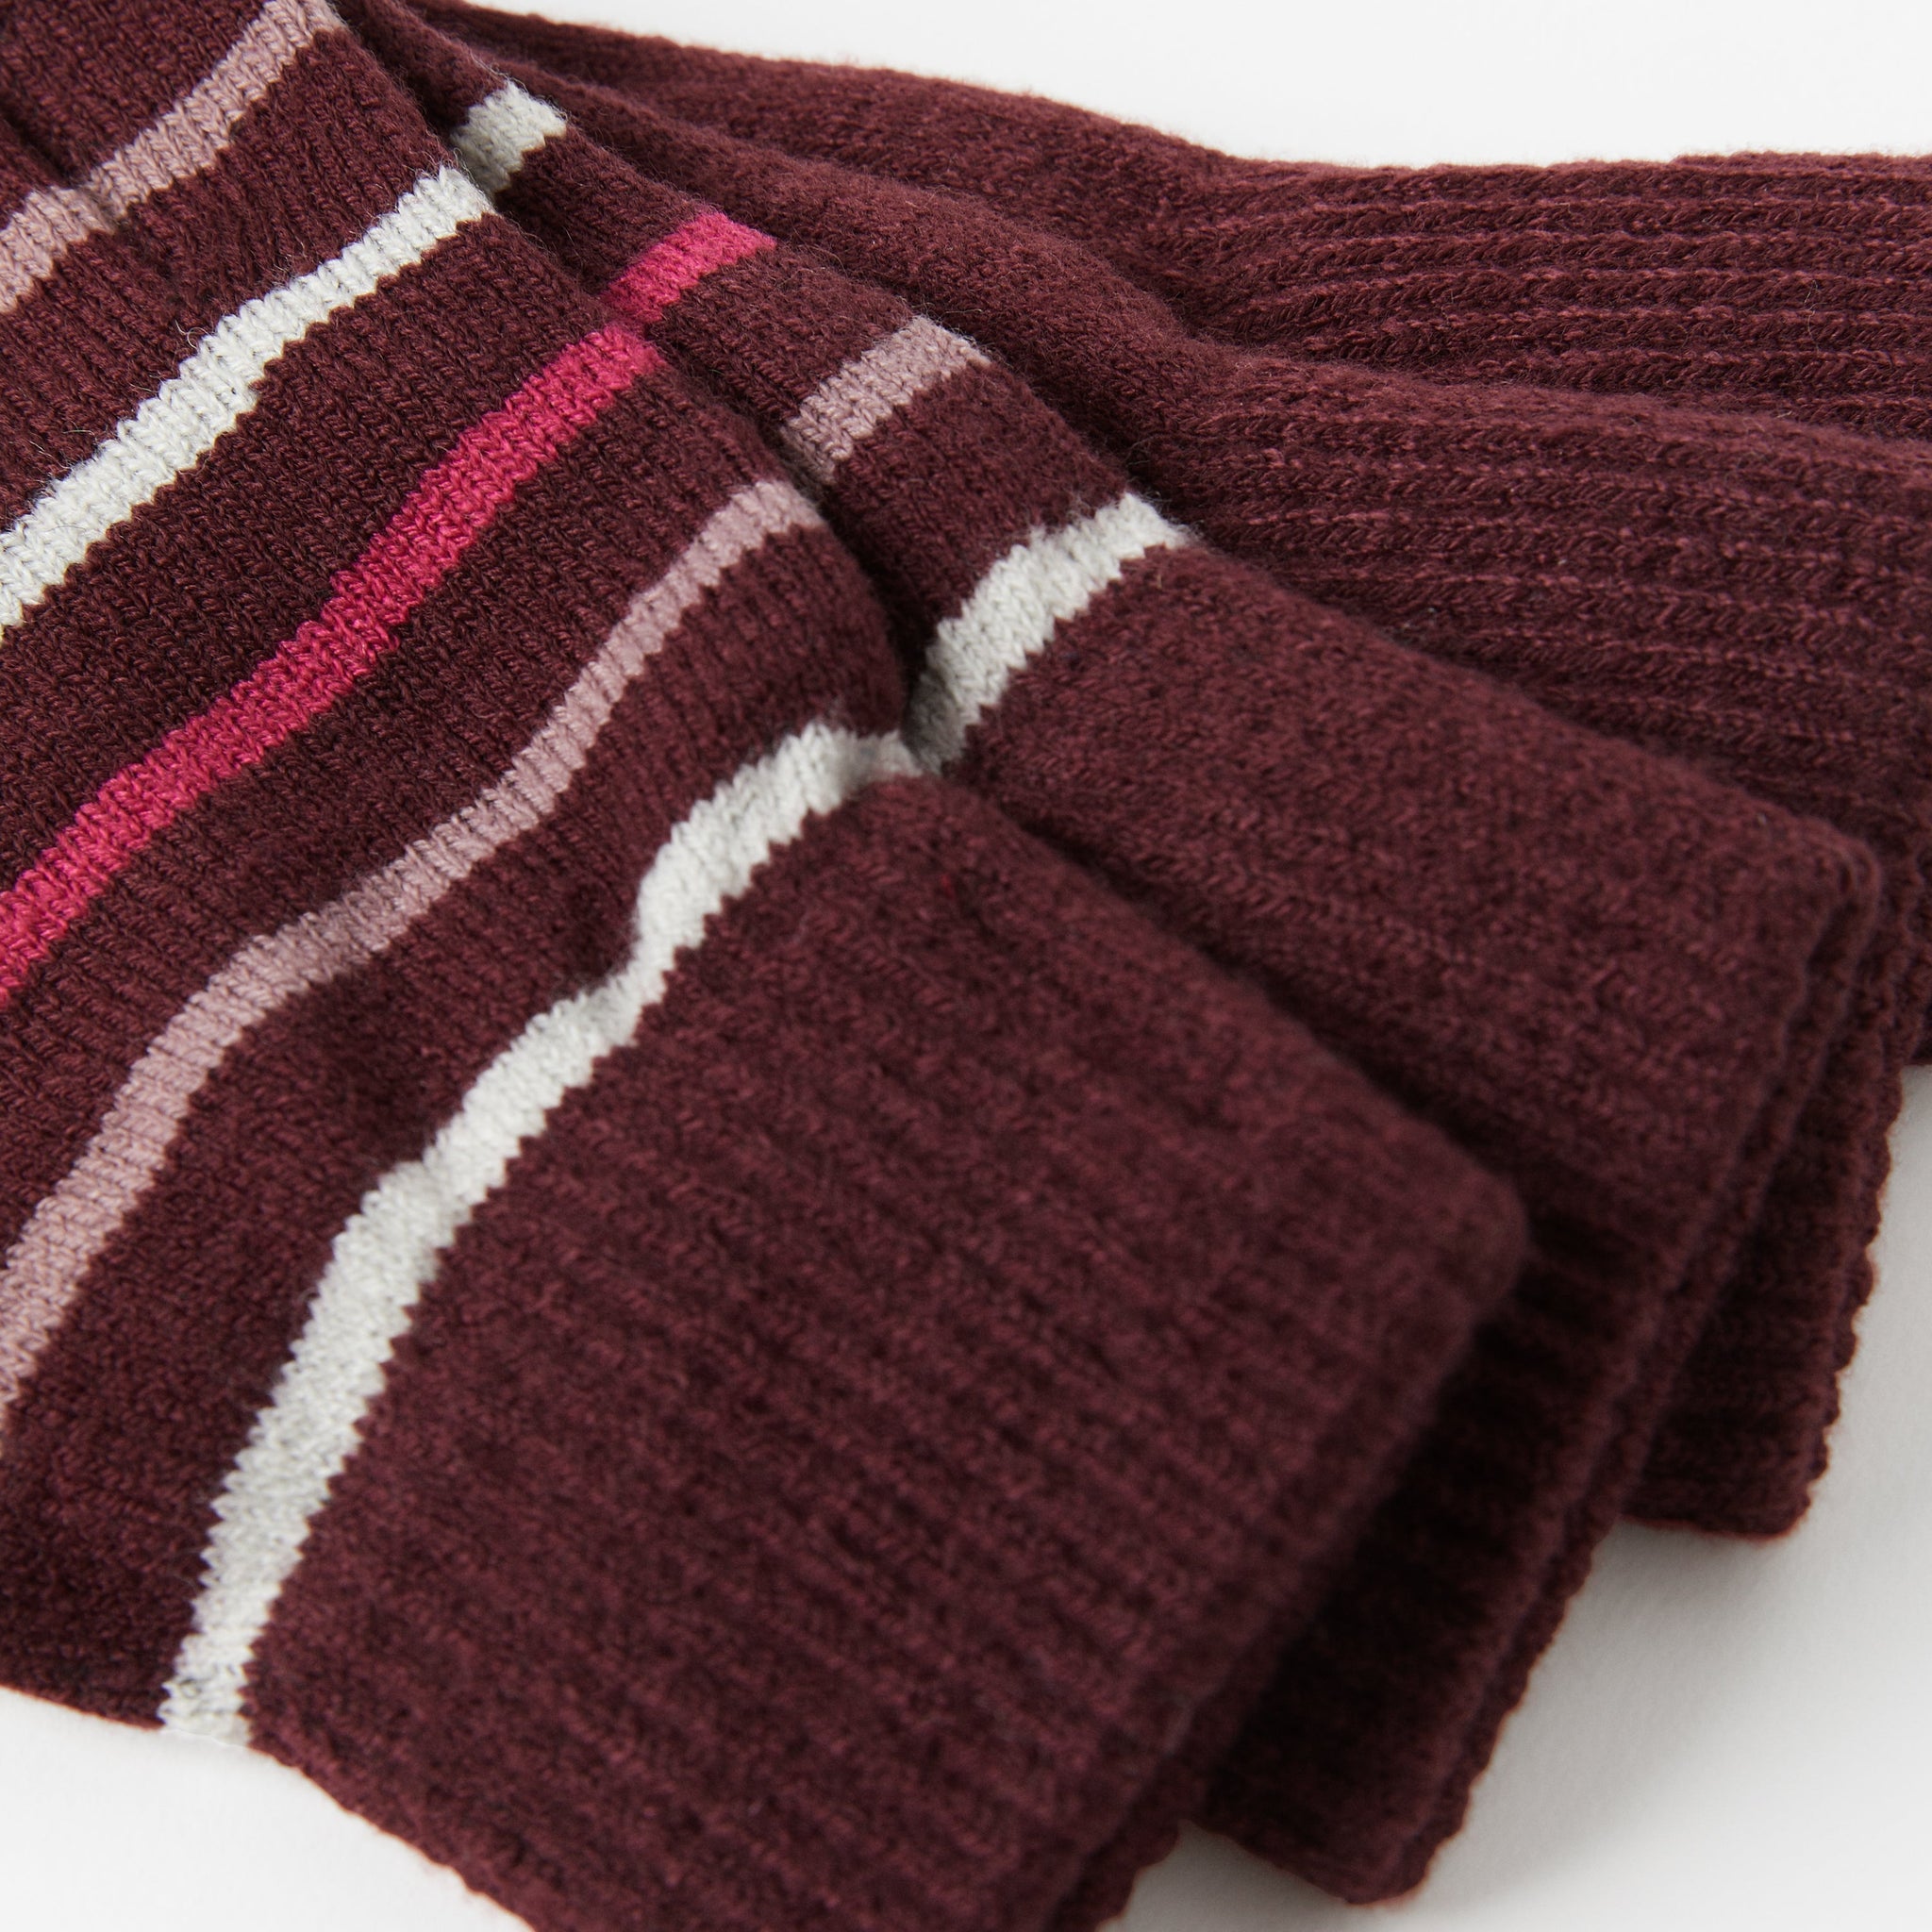 Burgundy Magic Kids Gloves Multipack from the Polarn O. Pyret kidswear collection. Made from sustainable sources.